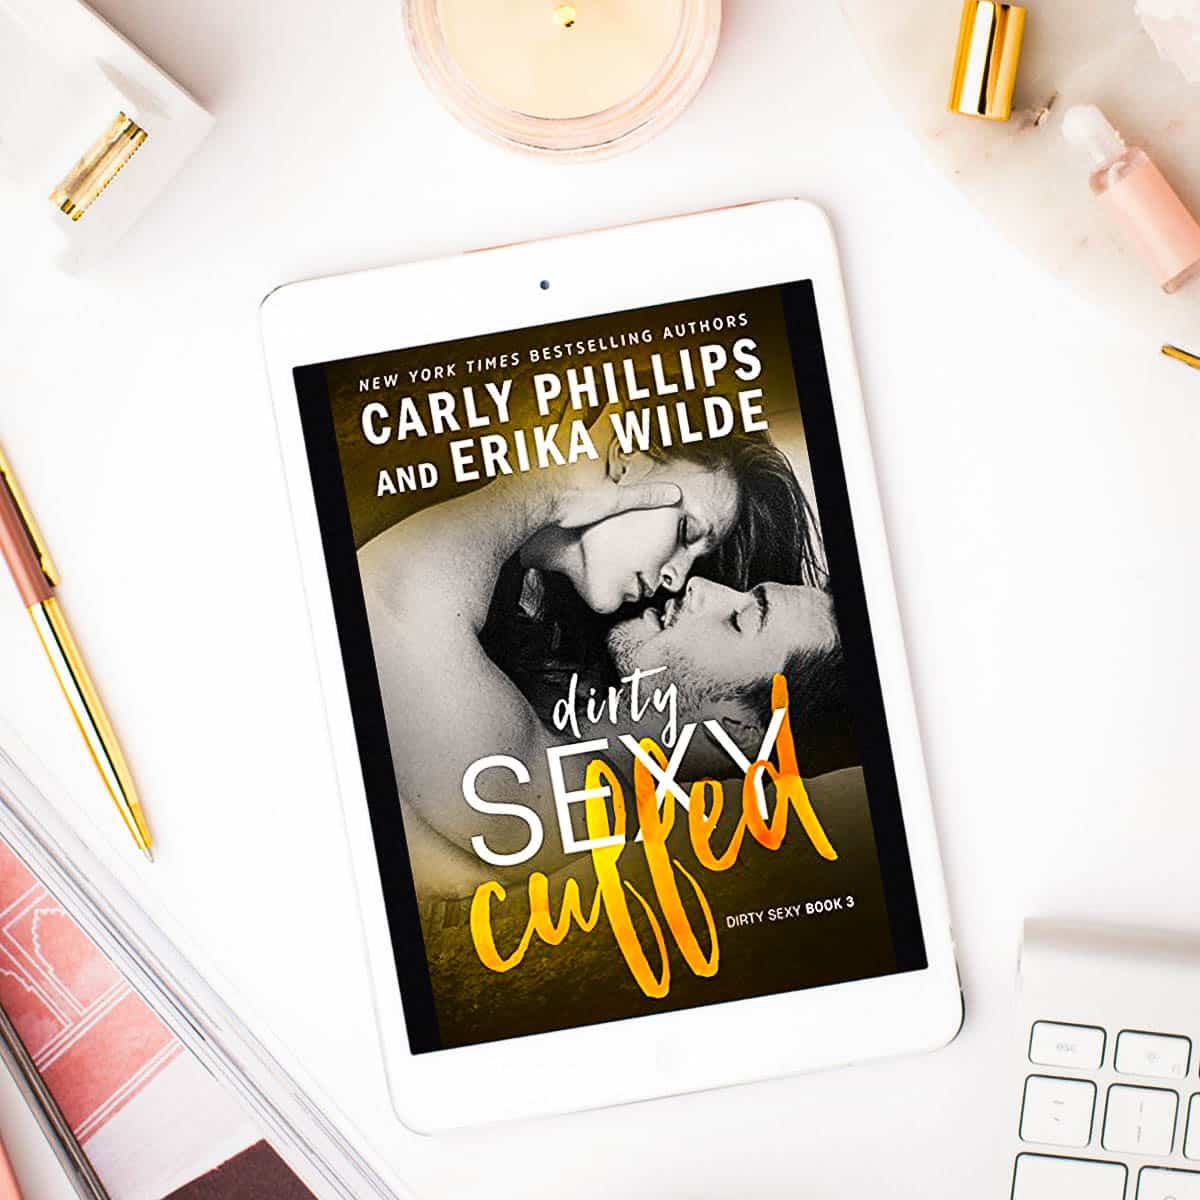 Dirty Sexy Cuffed by Carly Phillips and Erika Wilde – Dirty Sexy Book 3